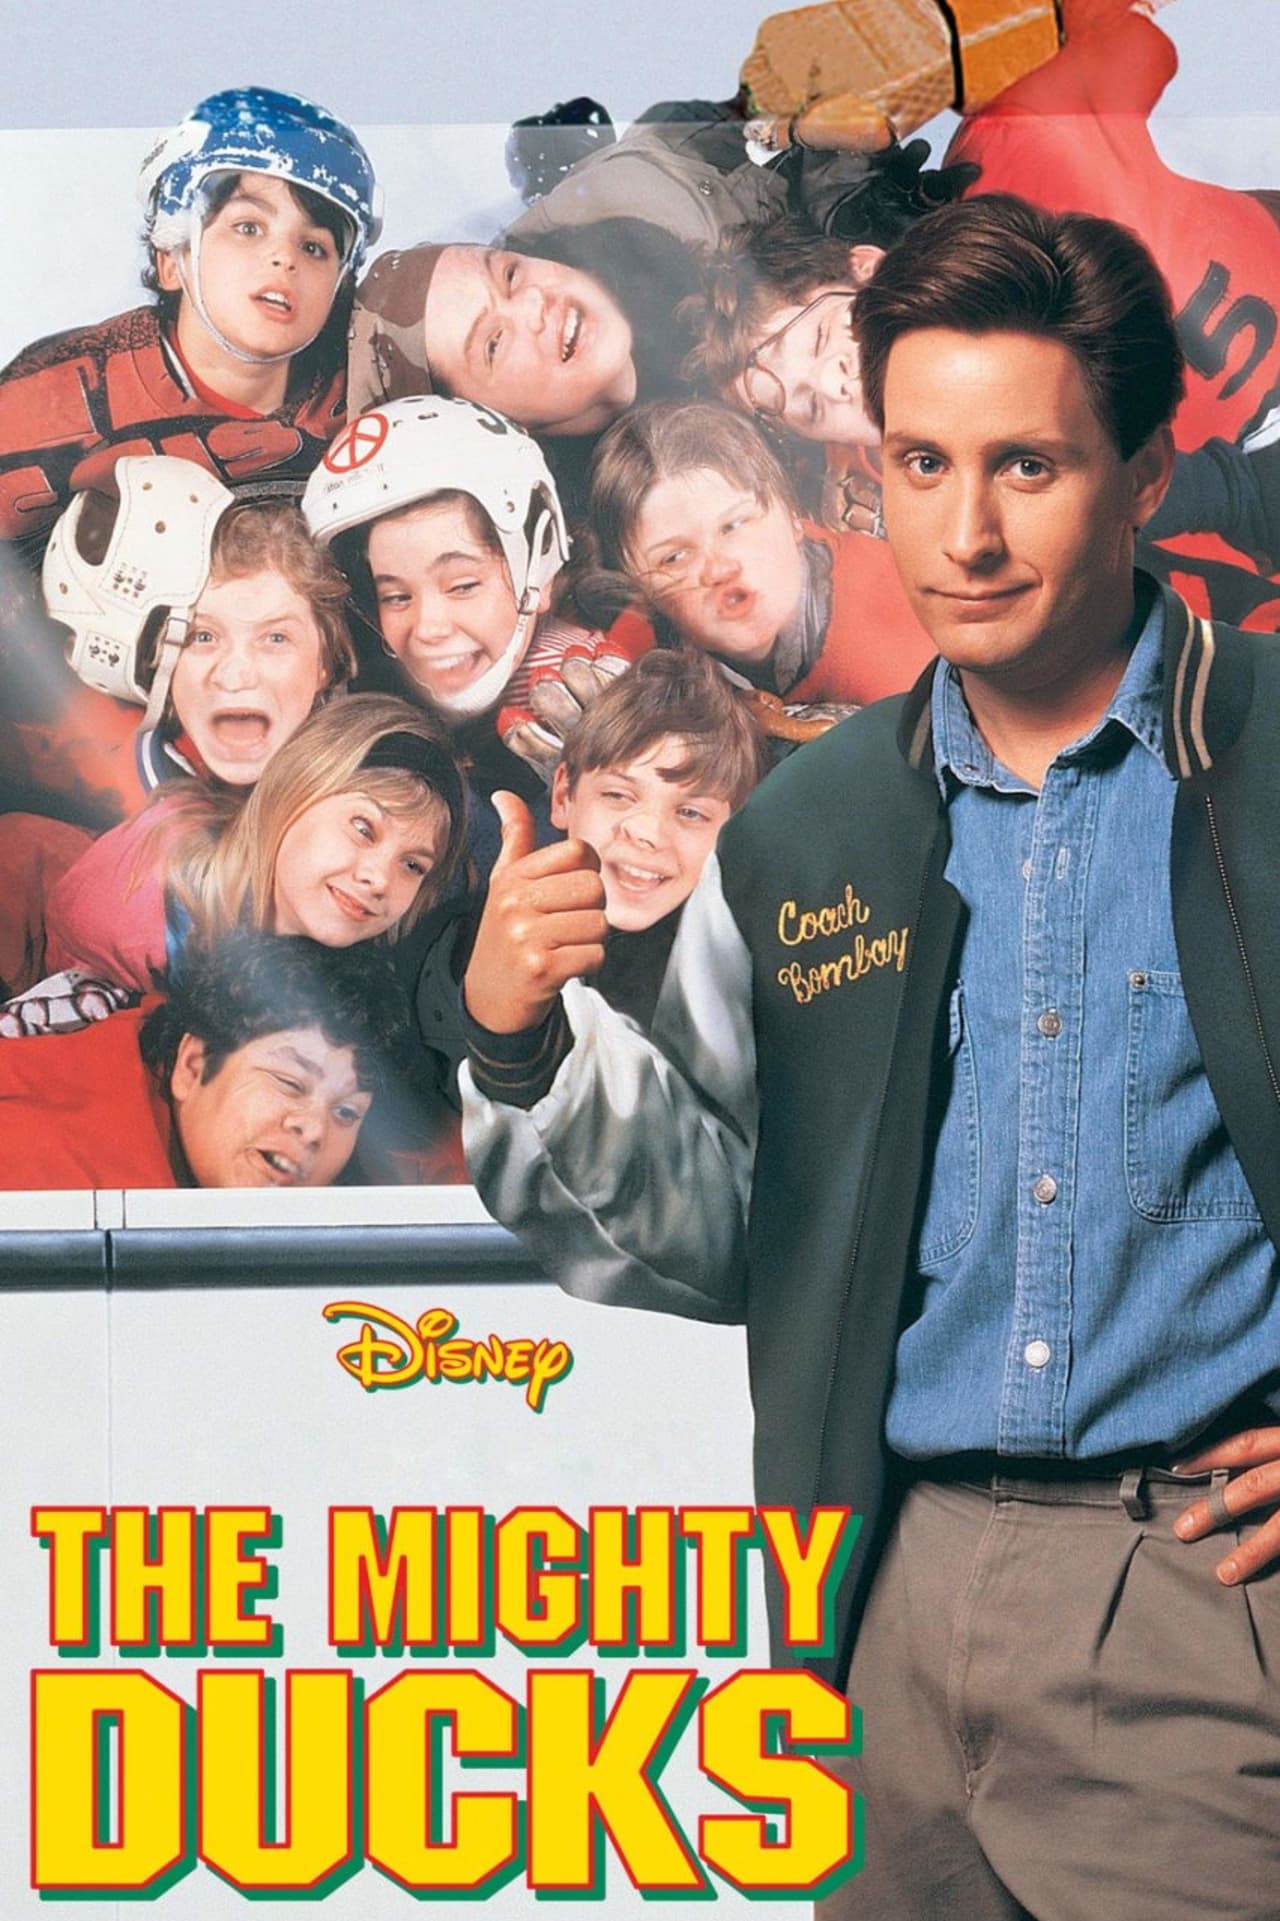 "The Mighty Ducks," starring Emilio Estevez will be shown free Monday at the Bergenfield Public Library.